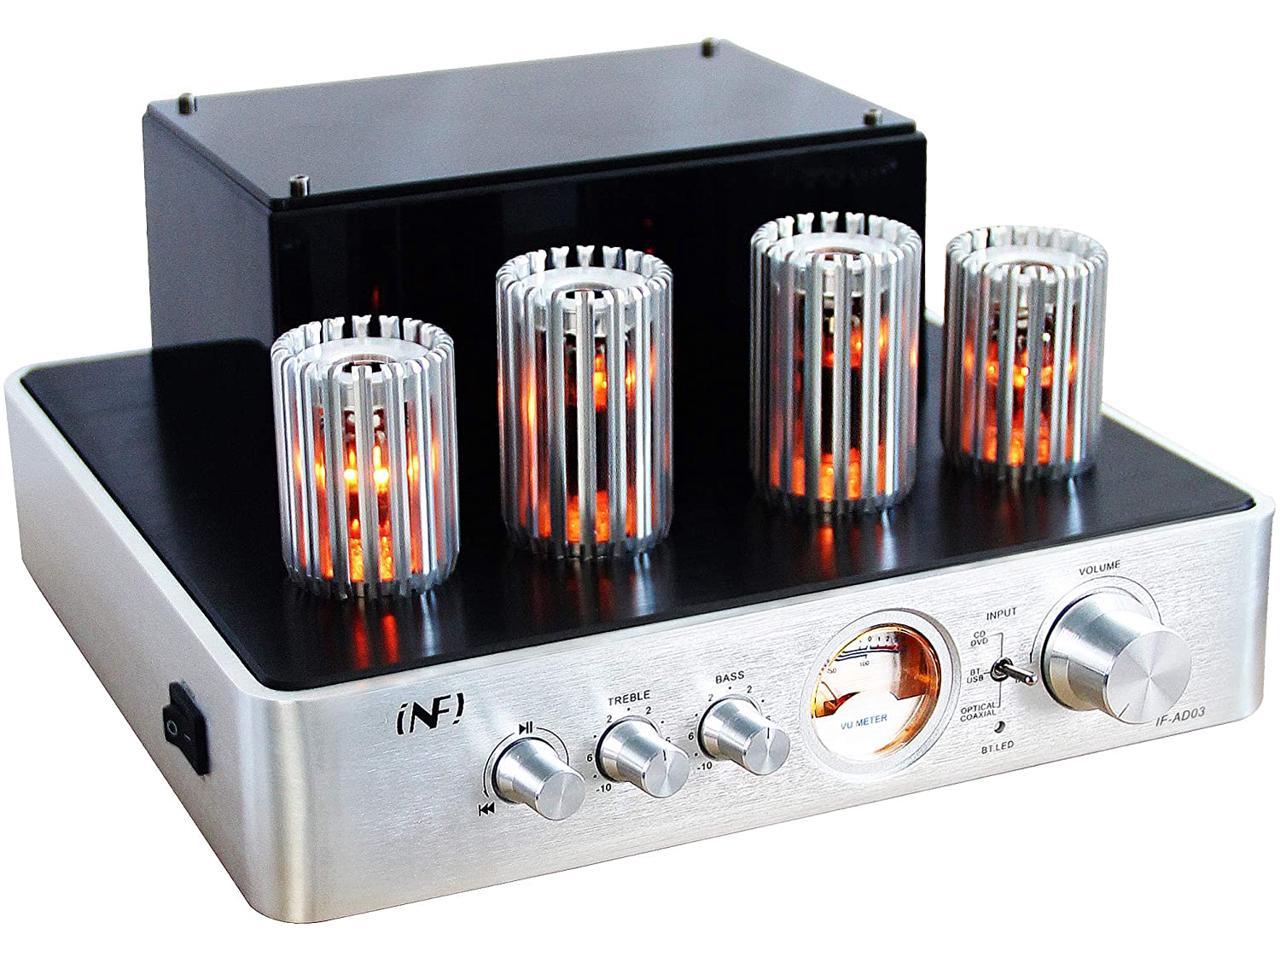 INFI Audio 80W Tube Amplifier, HiFi Stereo Receiver Integrated Amp with